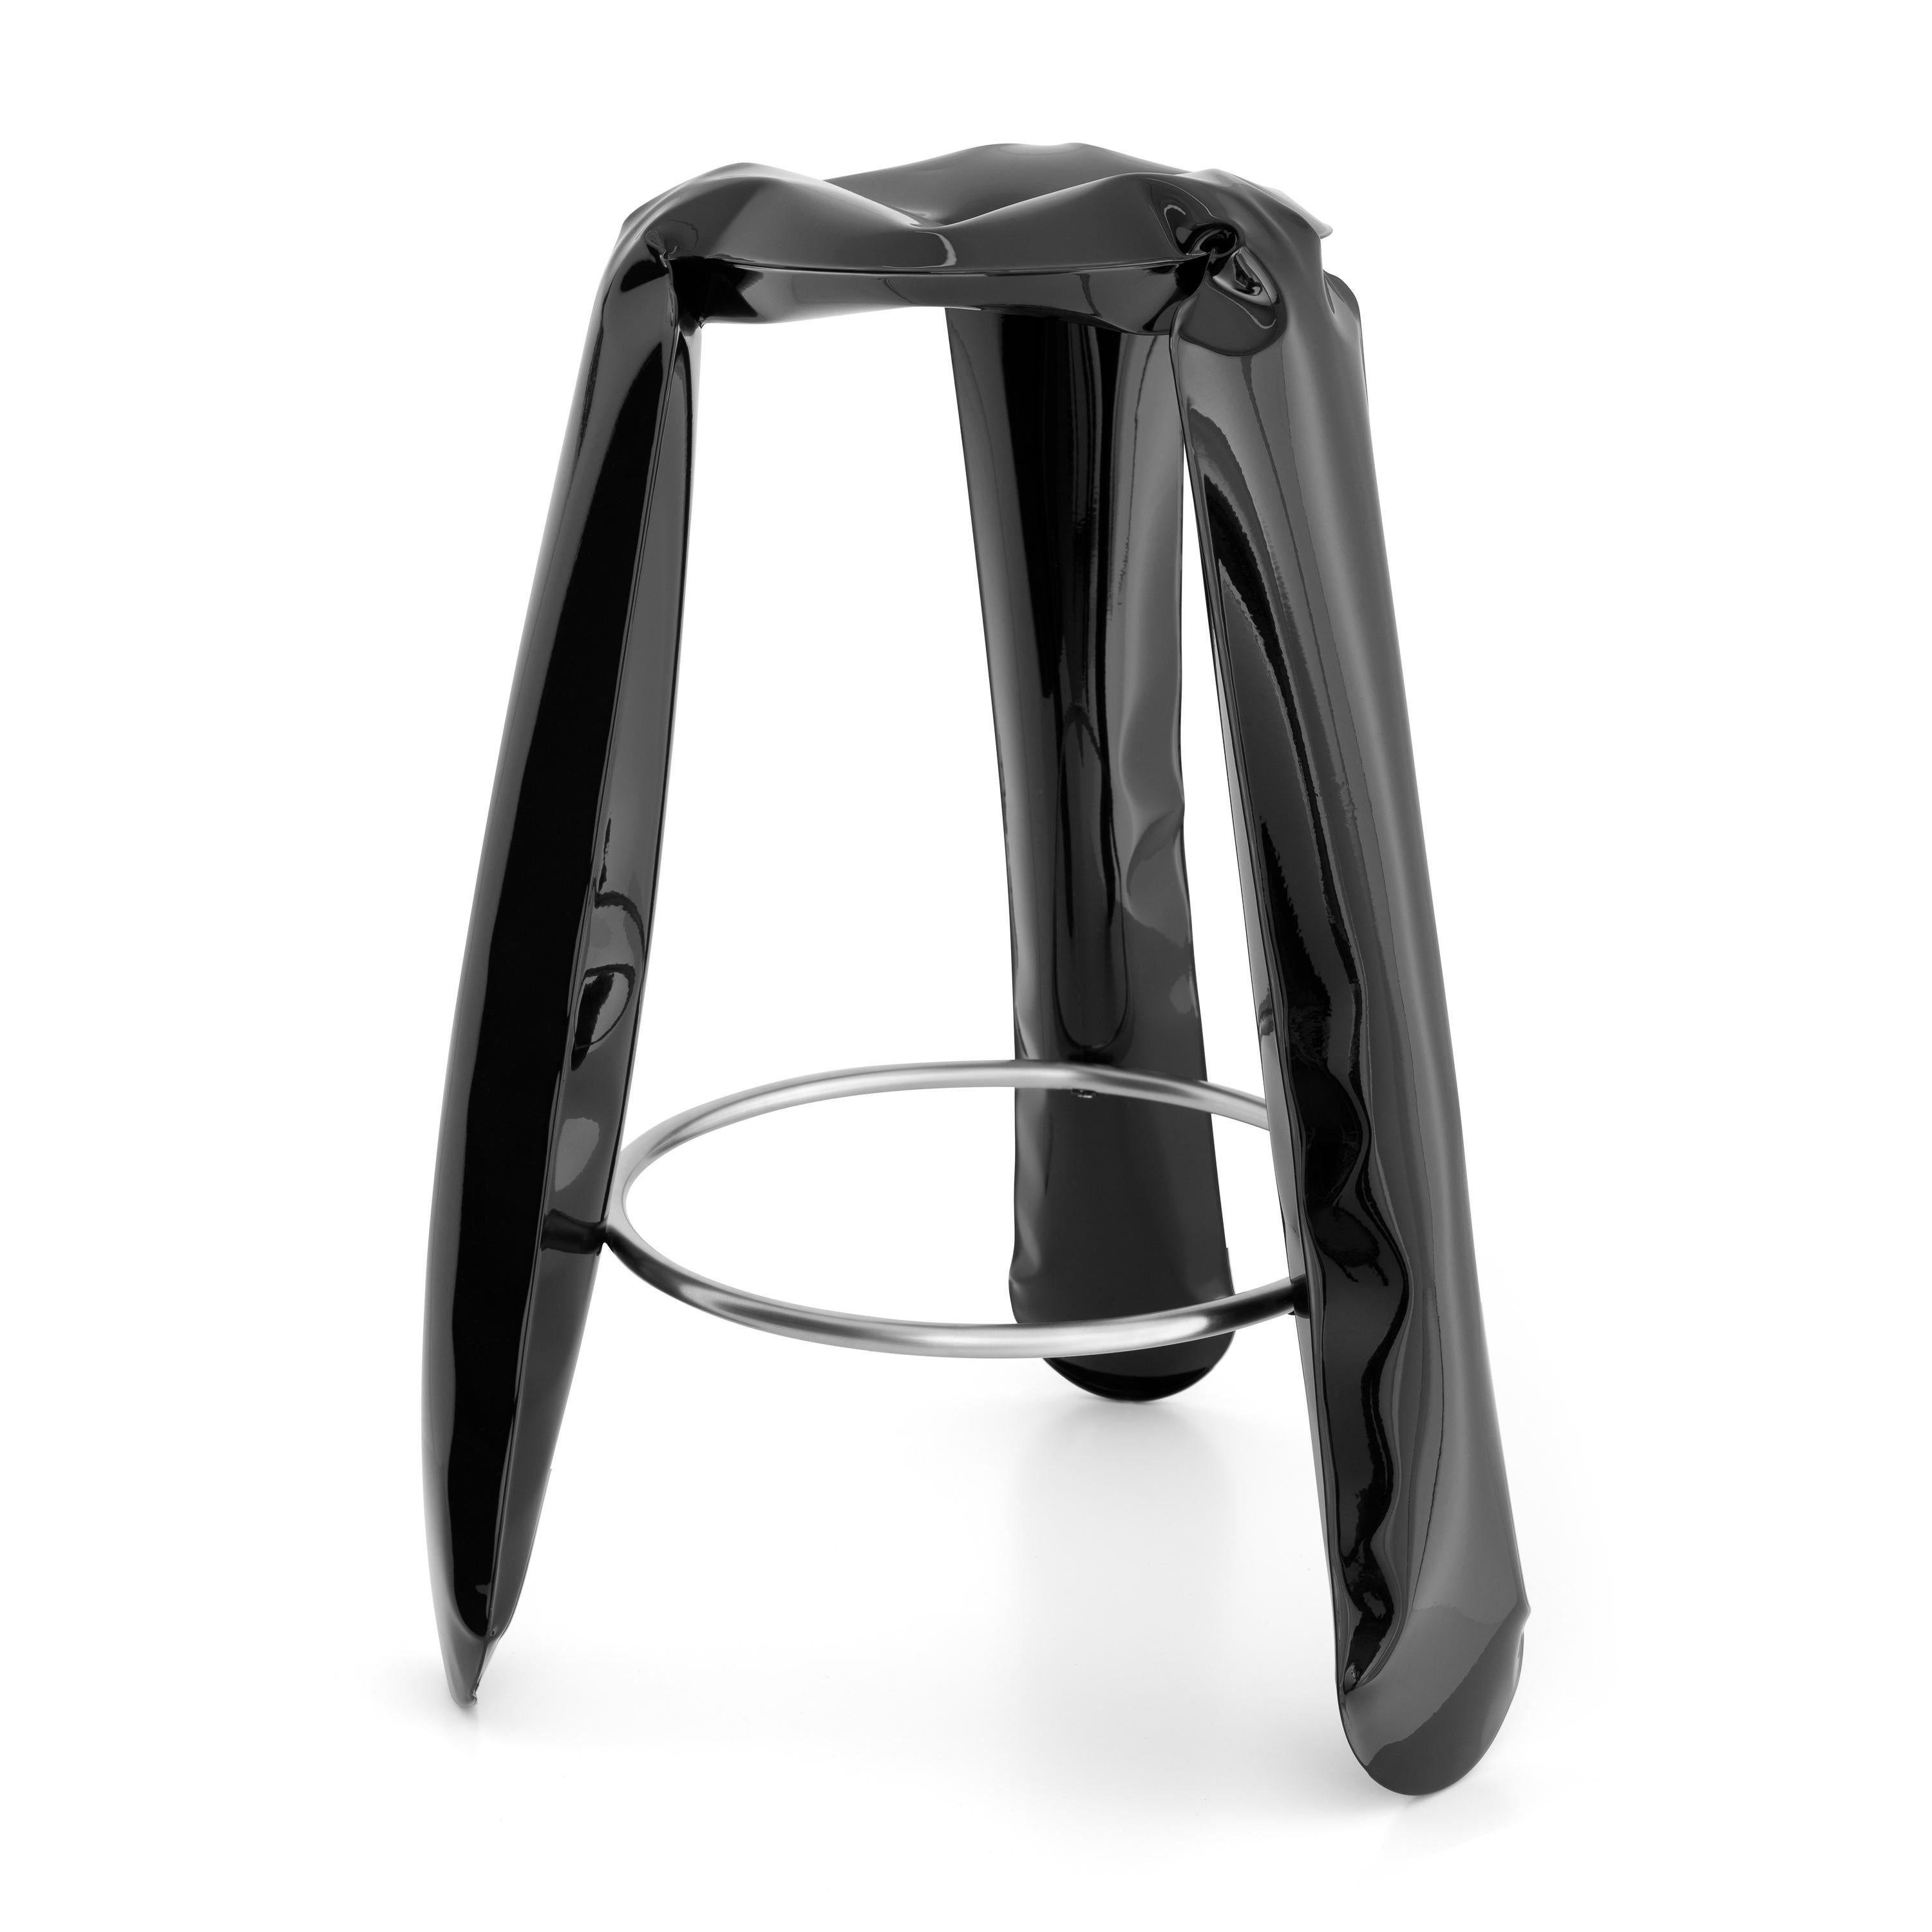 Black Glossy Steel Bar Plopp stool by Zieta
Dimensions: D 35 x H 75 cm 
Material: Carbon steel. 
Finish: Powder-Coated. Glossy finish. 
Available in colors: Beige, black, white, blue, graphite, moss, umbra gray, flaming gold, and cosmic blue.